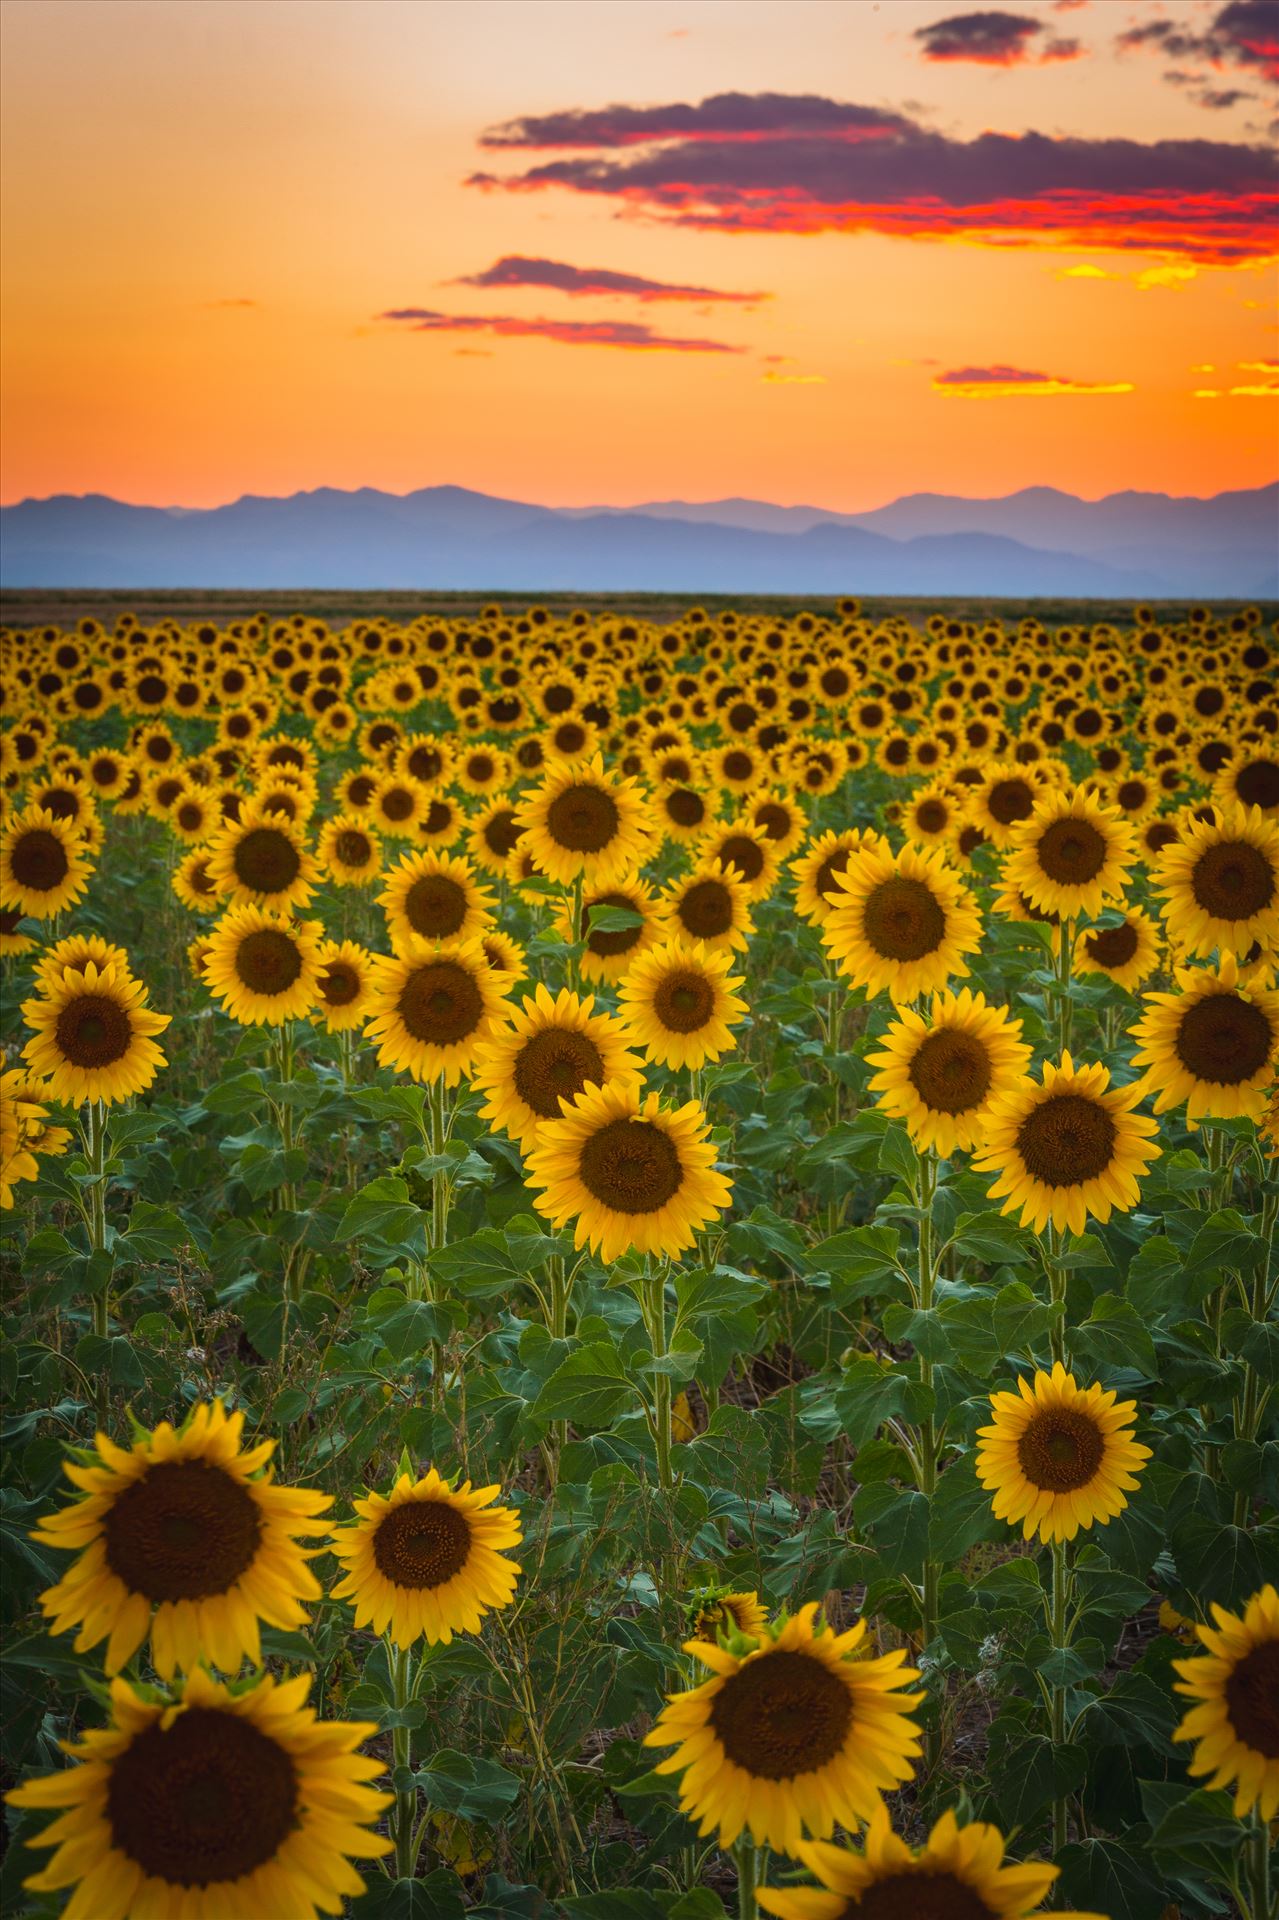 Denver Sunflowers at Sunset No 2 - Sunflower fields near Denver International Airport, on August 20th, 2016. Near 56th and E470. by Scott Smith Photos